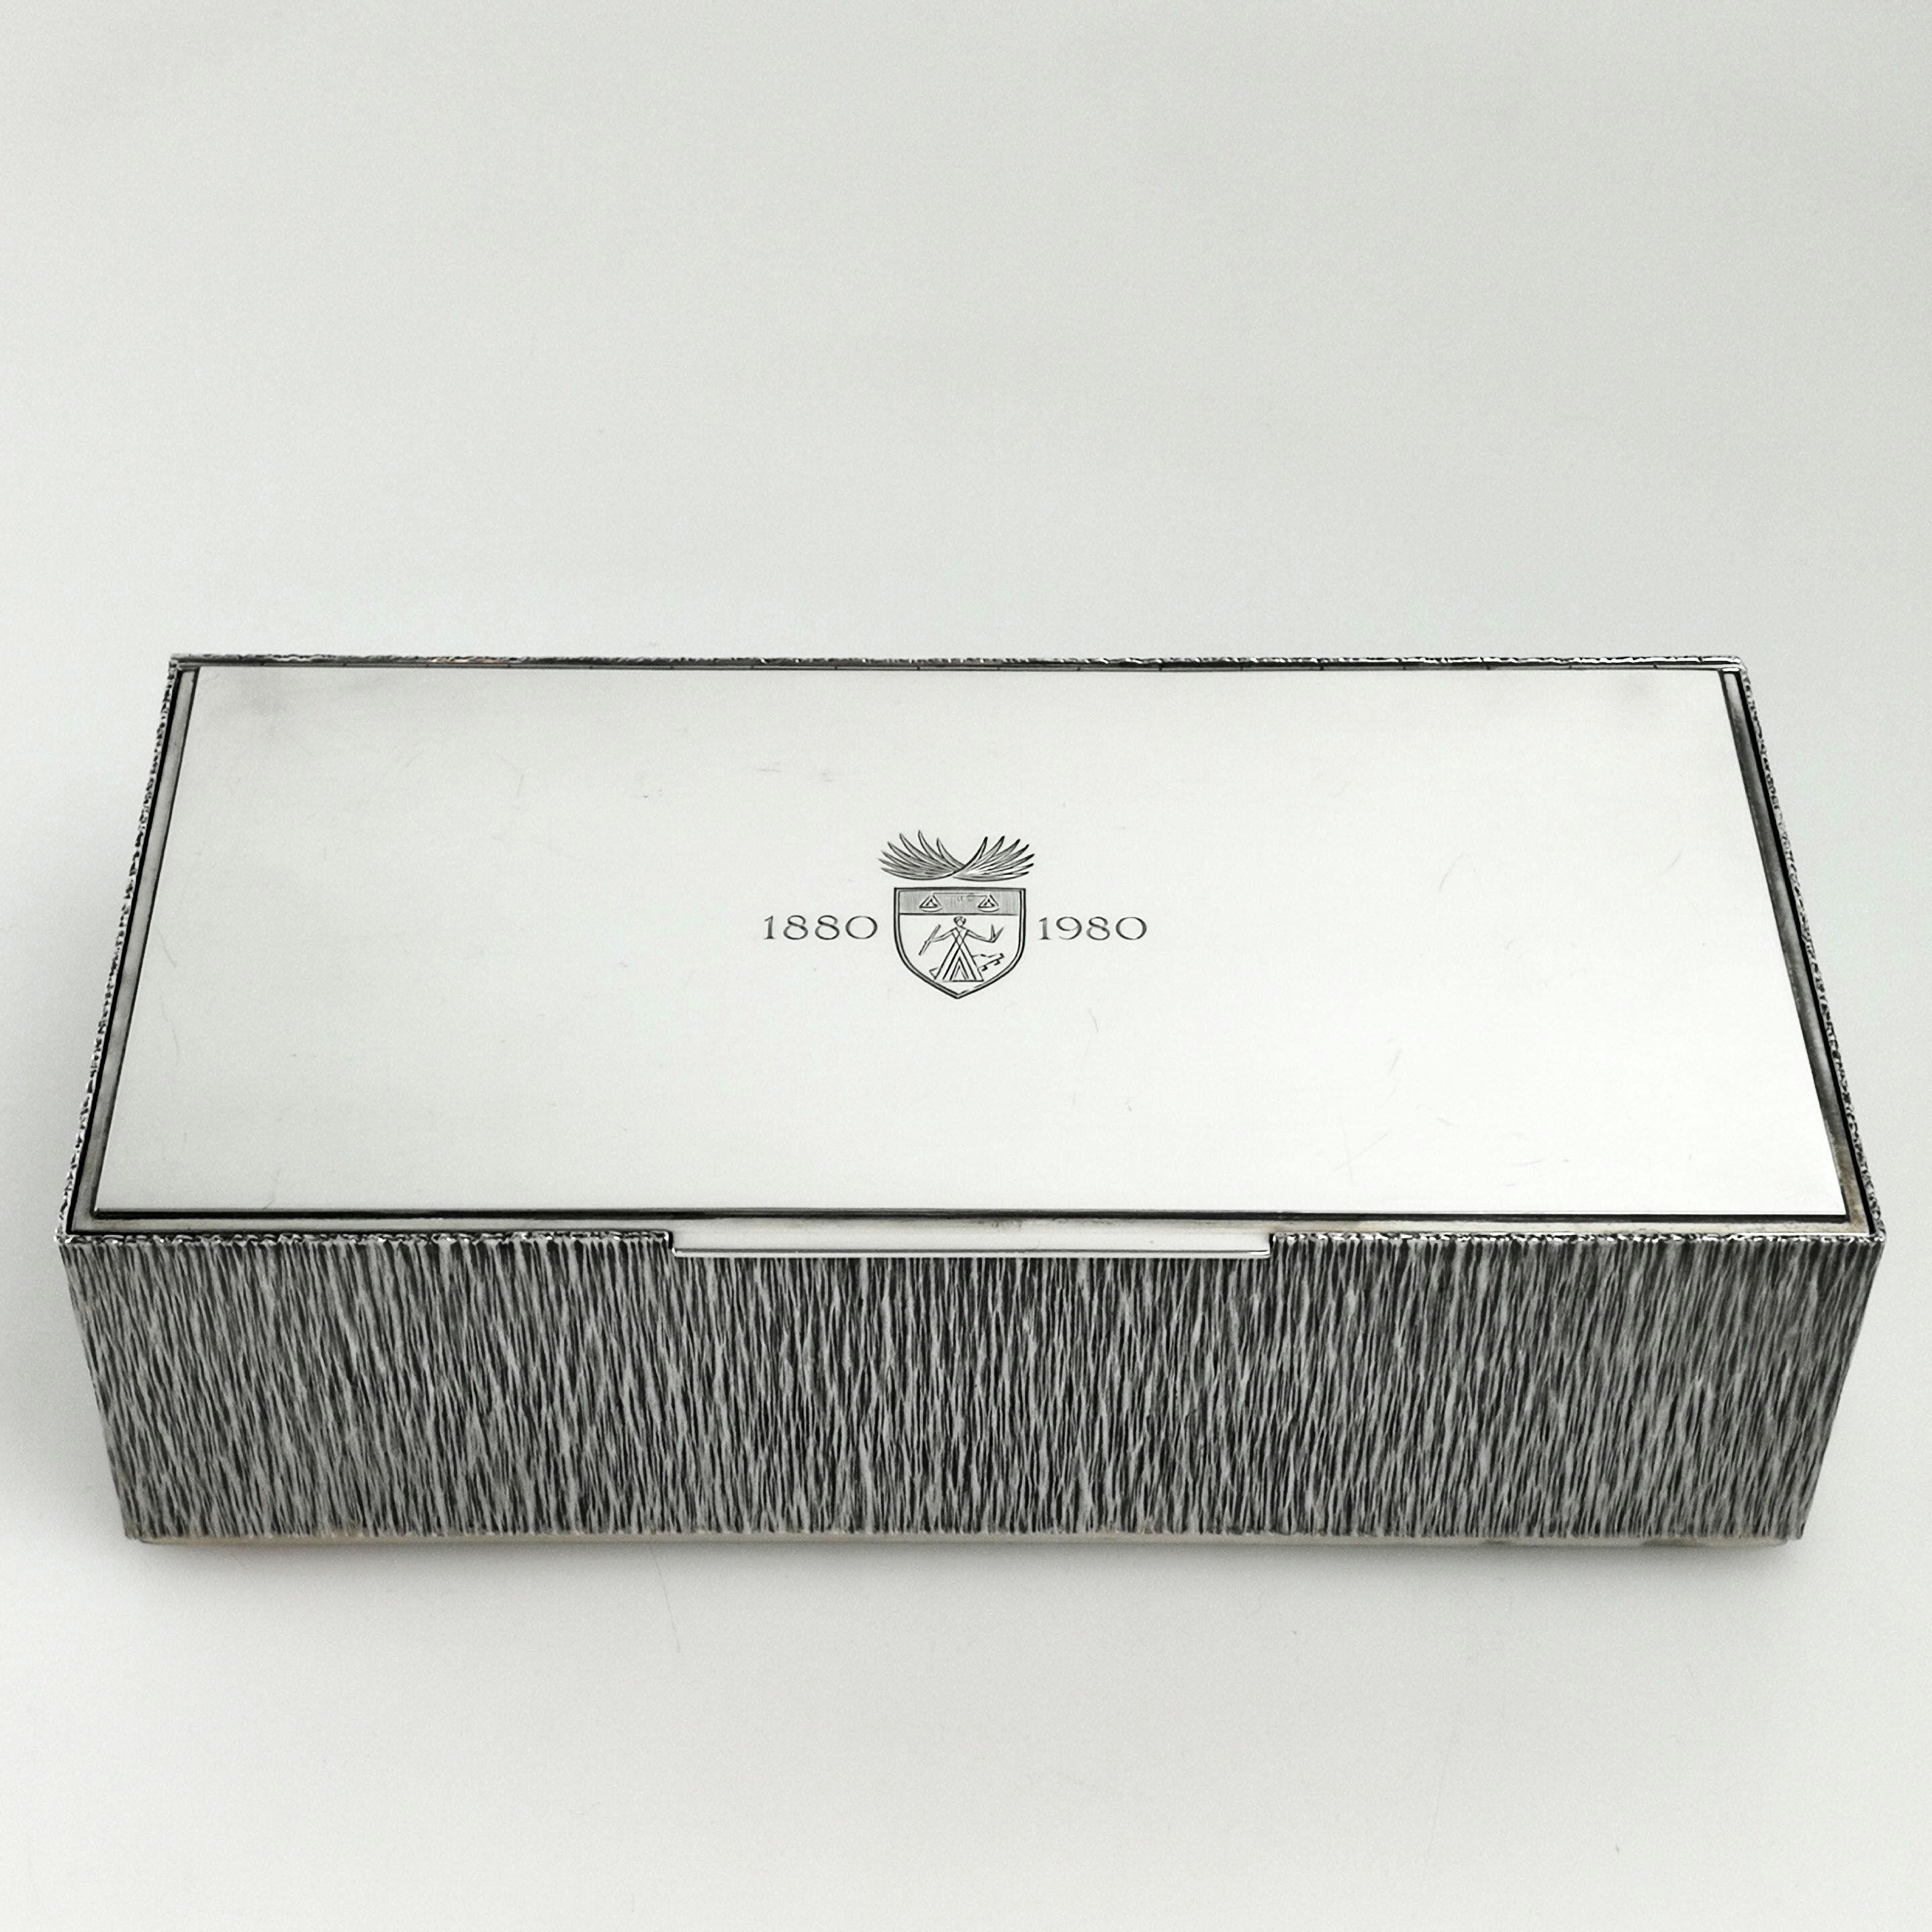 A gorgeous solid Silver Cigar Box by the acclaimed post war Silversmith Gerald Benney. An elegant rectangular Box with a bark effect on the sides and underside. The lid is polished silver with a small crests and the dates 1880-1980. The interior is